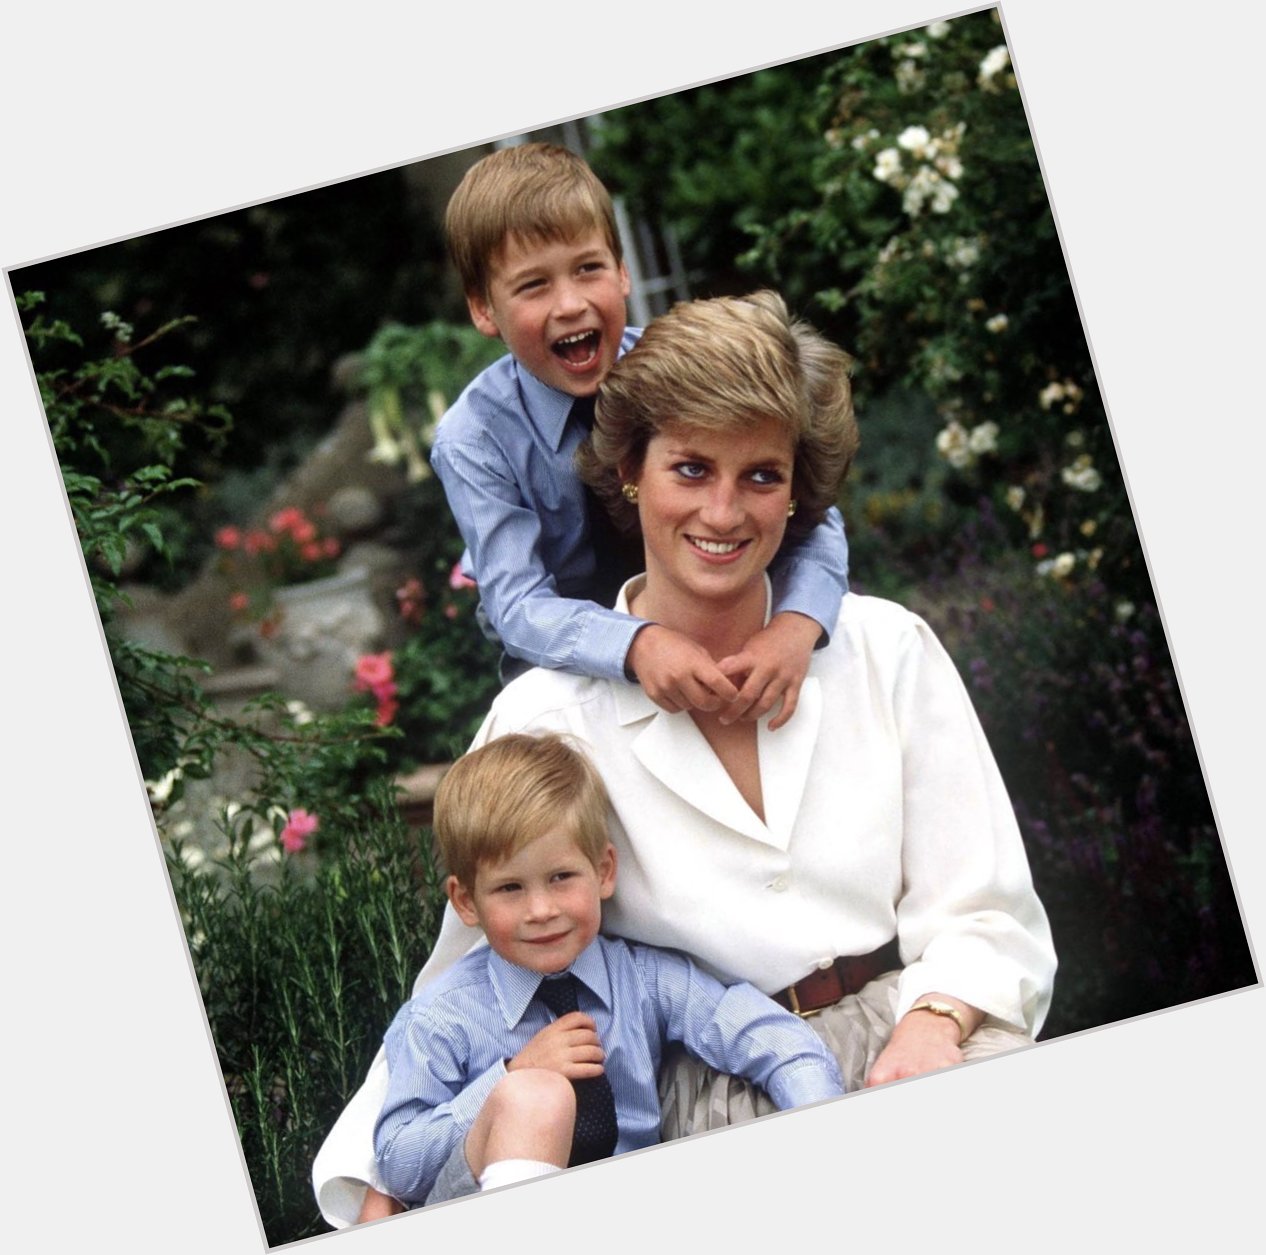 Happy Heavenly Birthday to a wonderful woman and Mother. 

Boy, how I miss Princess Diana   